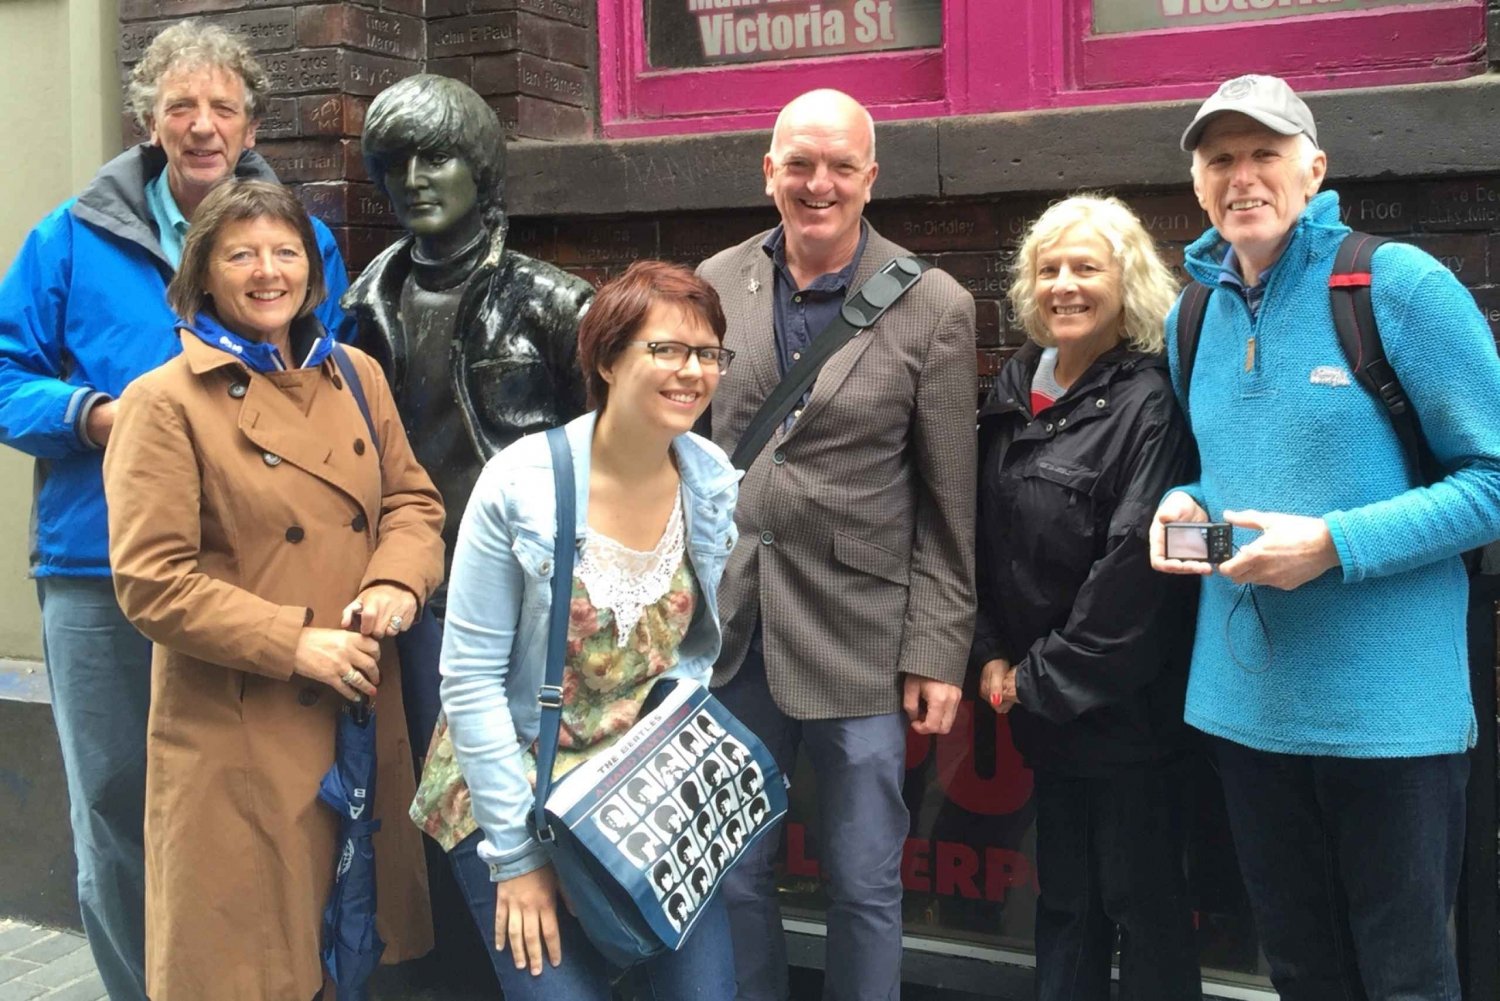 Liverpool: Beatles and City Walking Tour